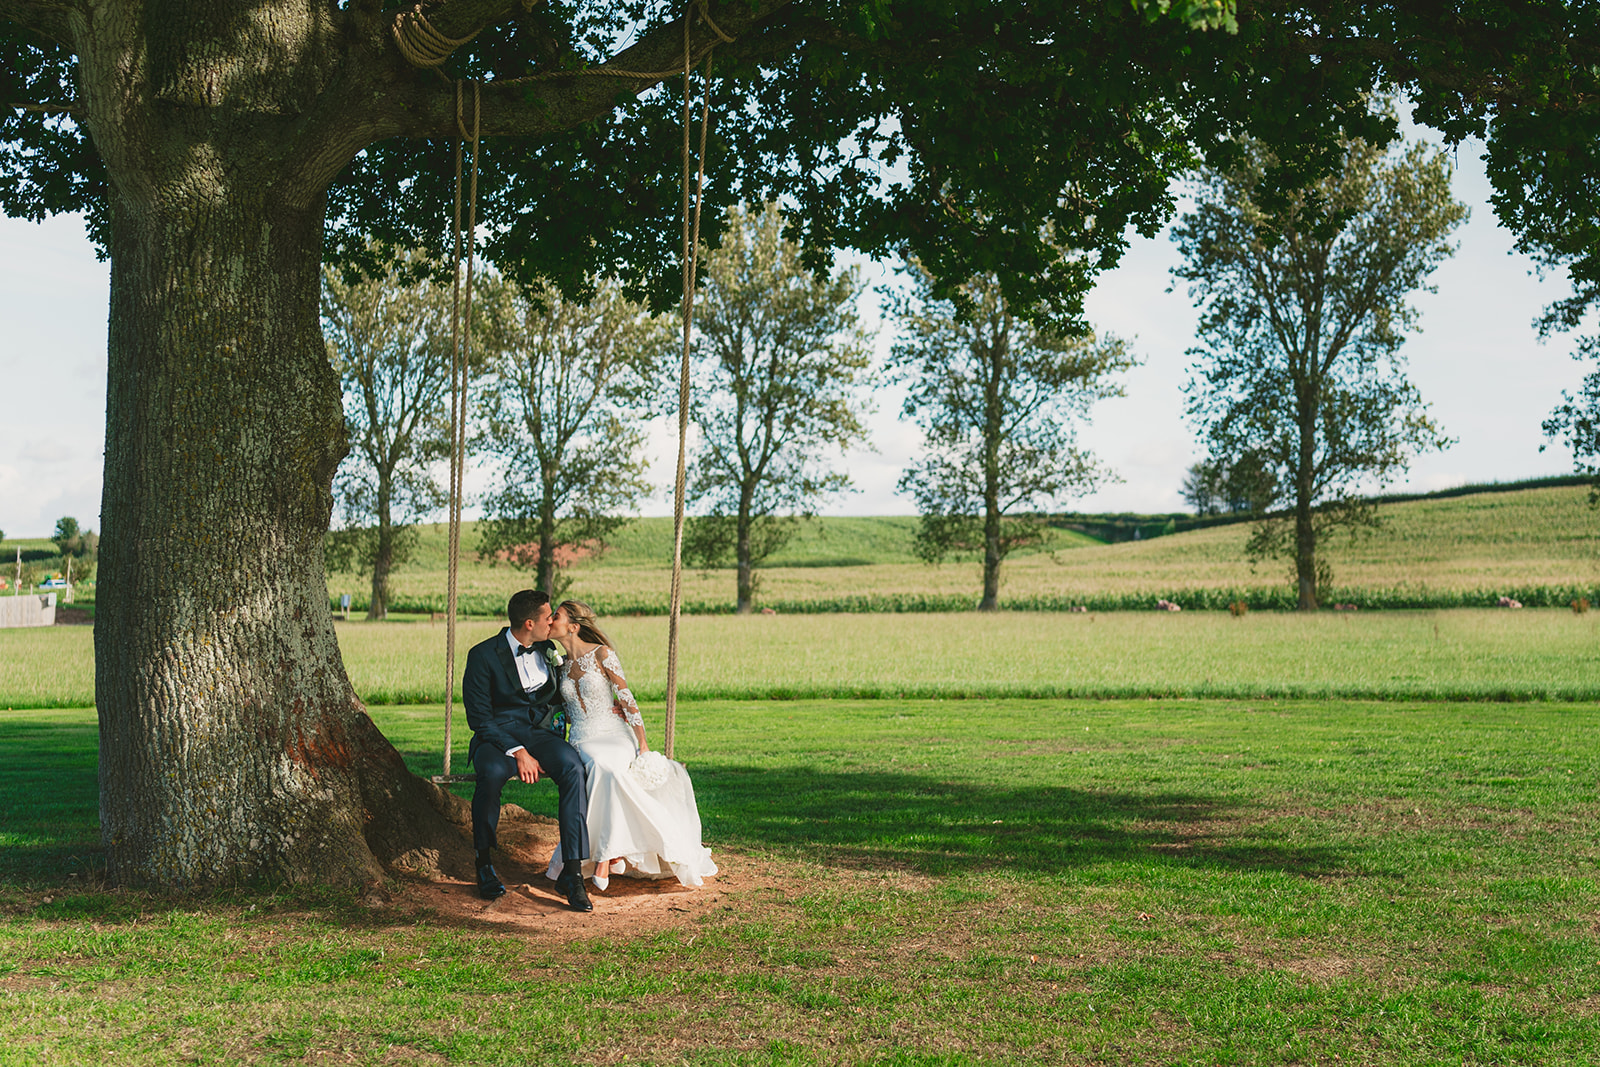 A bride and groom happily sitting on a swing in a serene field, captured beautifully by a Bristol wedding photographer.